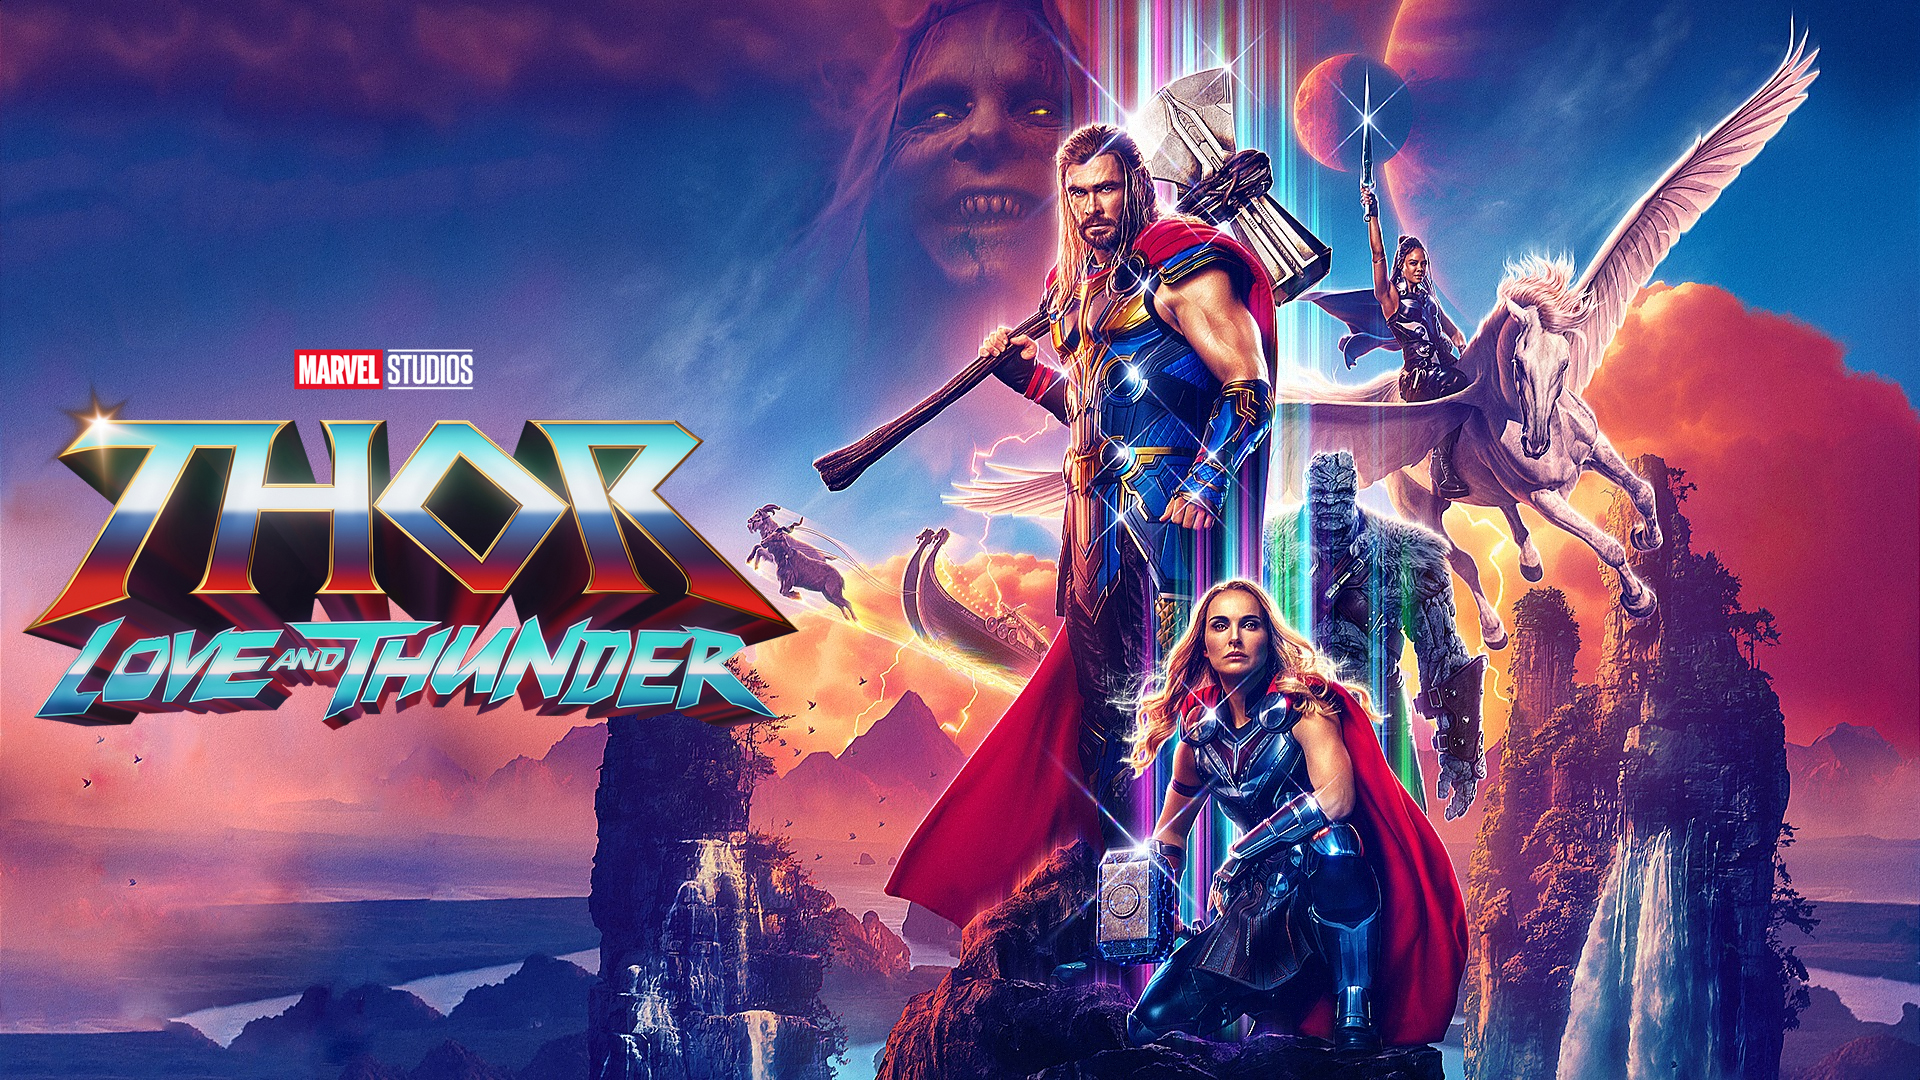 ‘Thor: Love and Thunder’ Combines Charisma, Comedy, And The Cosmos To Create Another Win For The MCU – Review